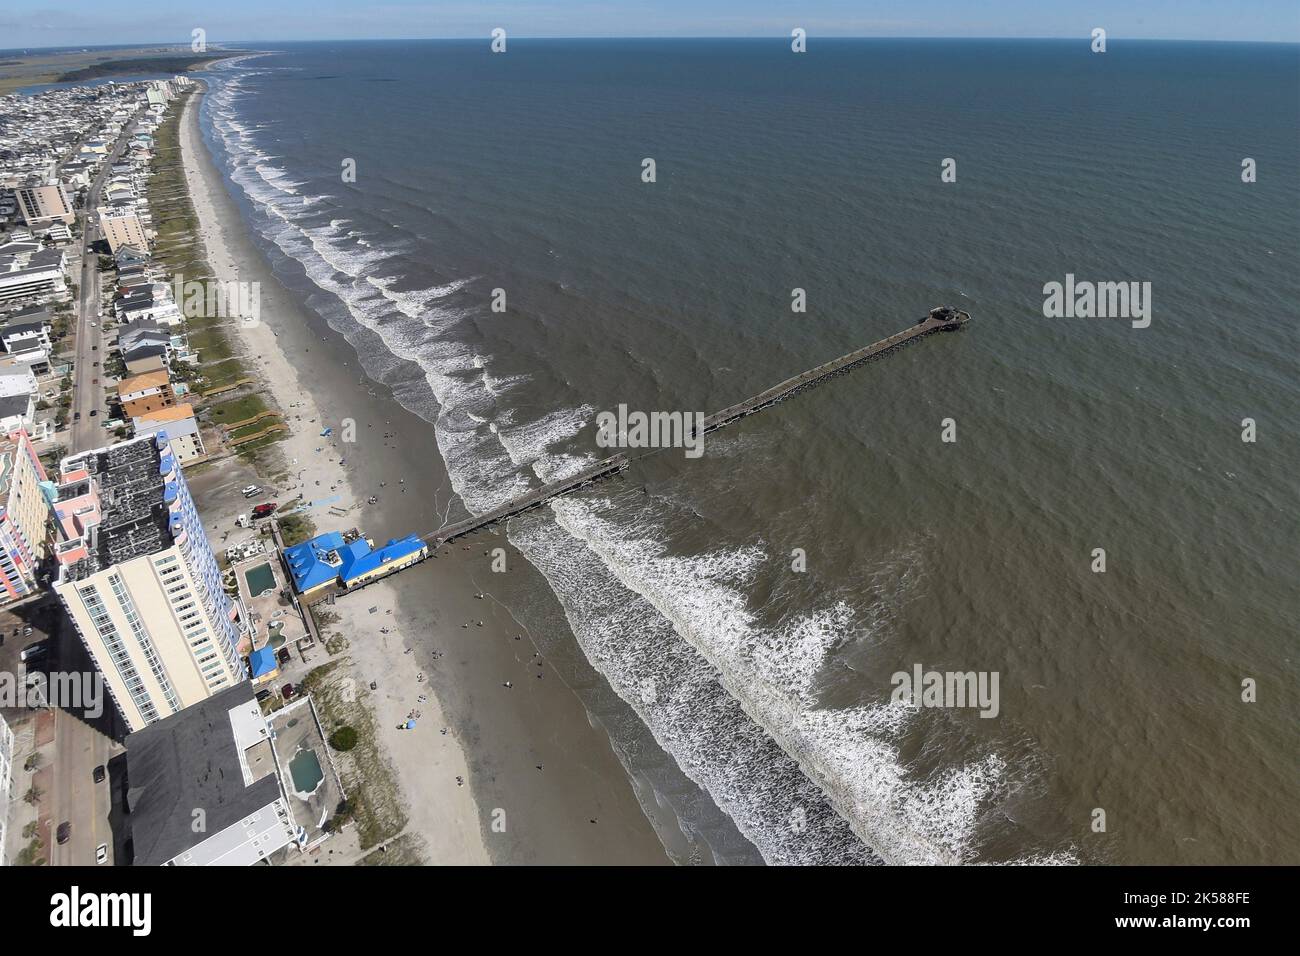 Myrtle Beach, United States. 01 October, 2022. View of the privately owned Cherry Grove Pier damaged by Category 1 Hurricane Ian at the Prince Resort, October 1, 2022 in Myrtle Beach, South Carolina. The storm surge from Hurricane Ian battered the Grand Strand region with high surf and winds. Stock Photo